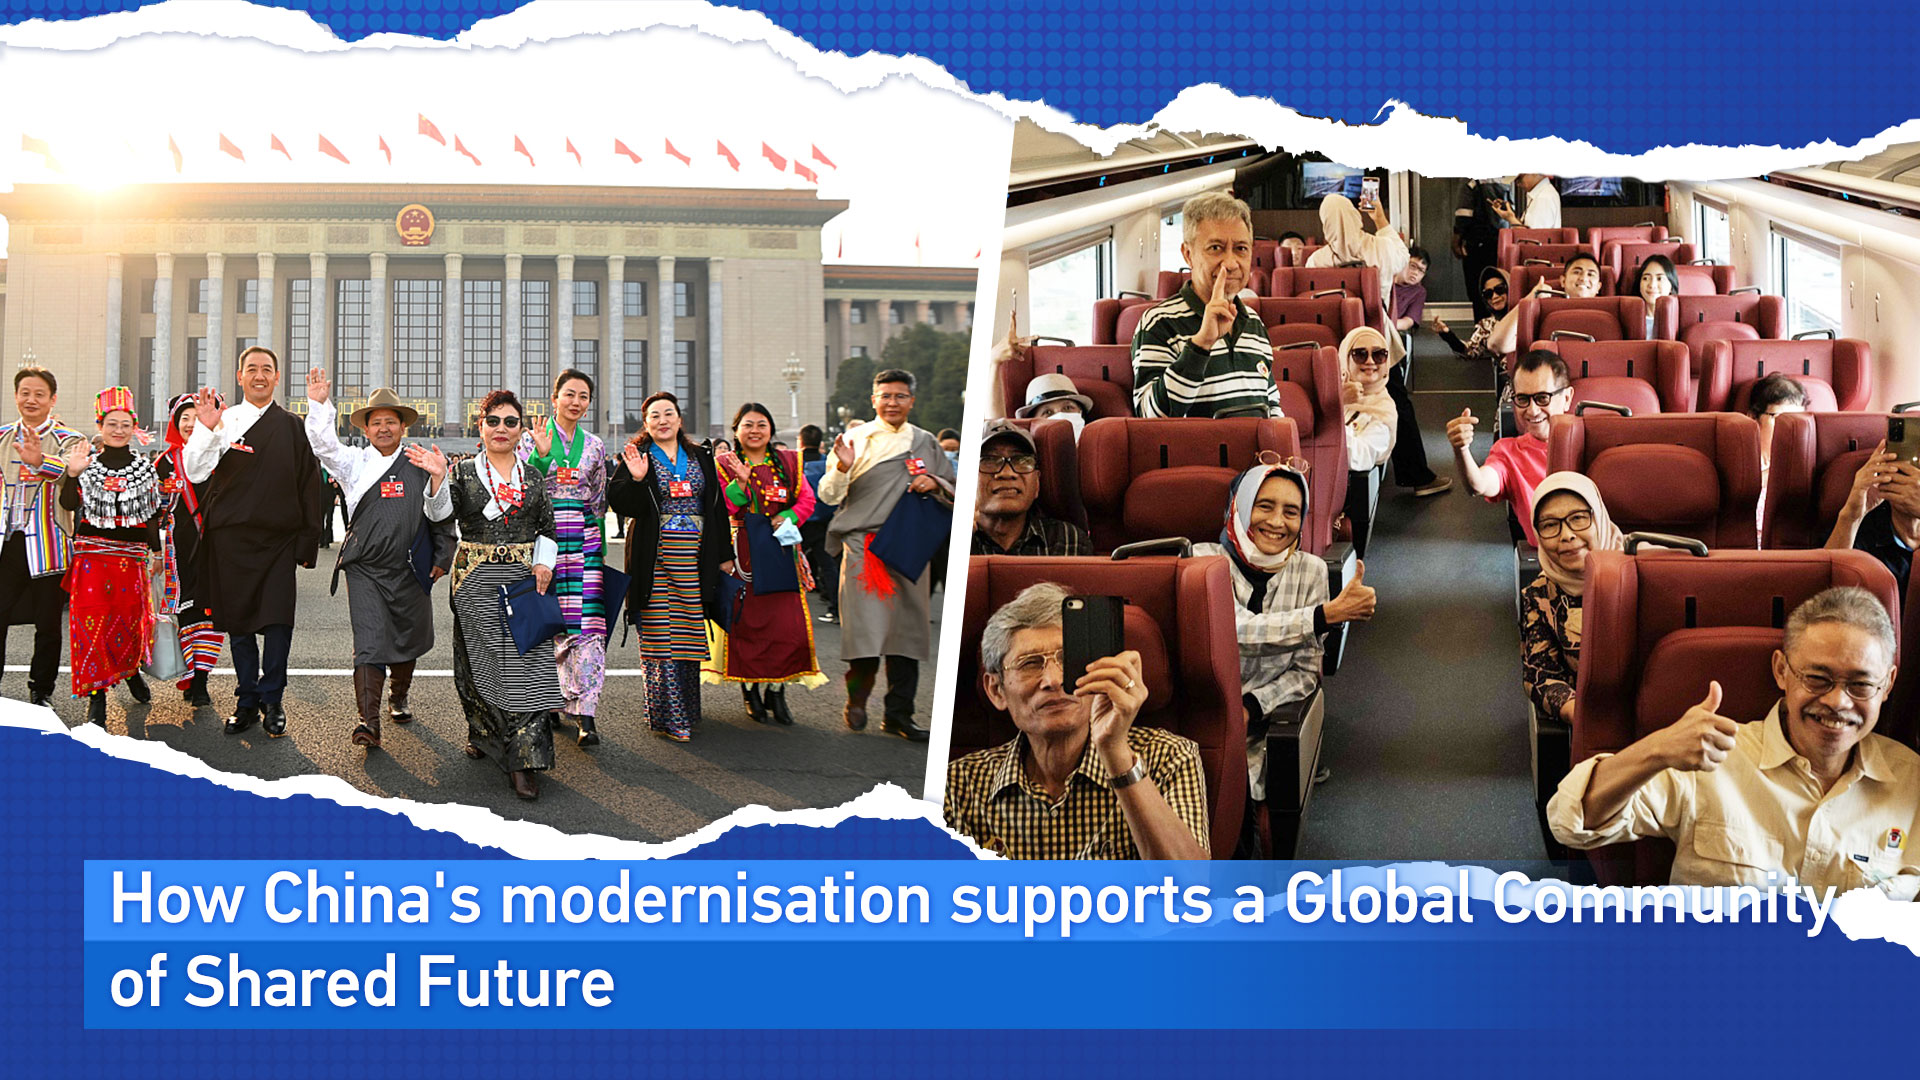 How China's modernisation supports a Global Community of Shared Future